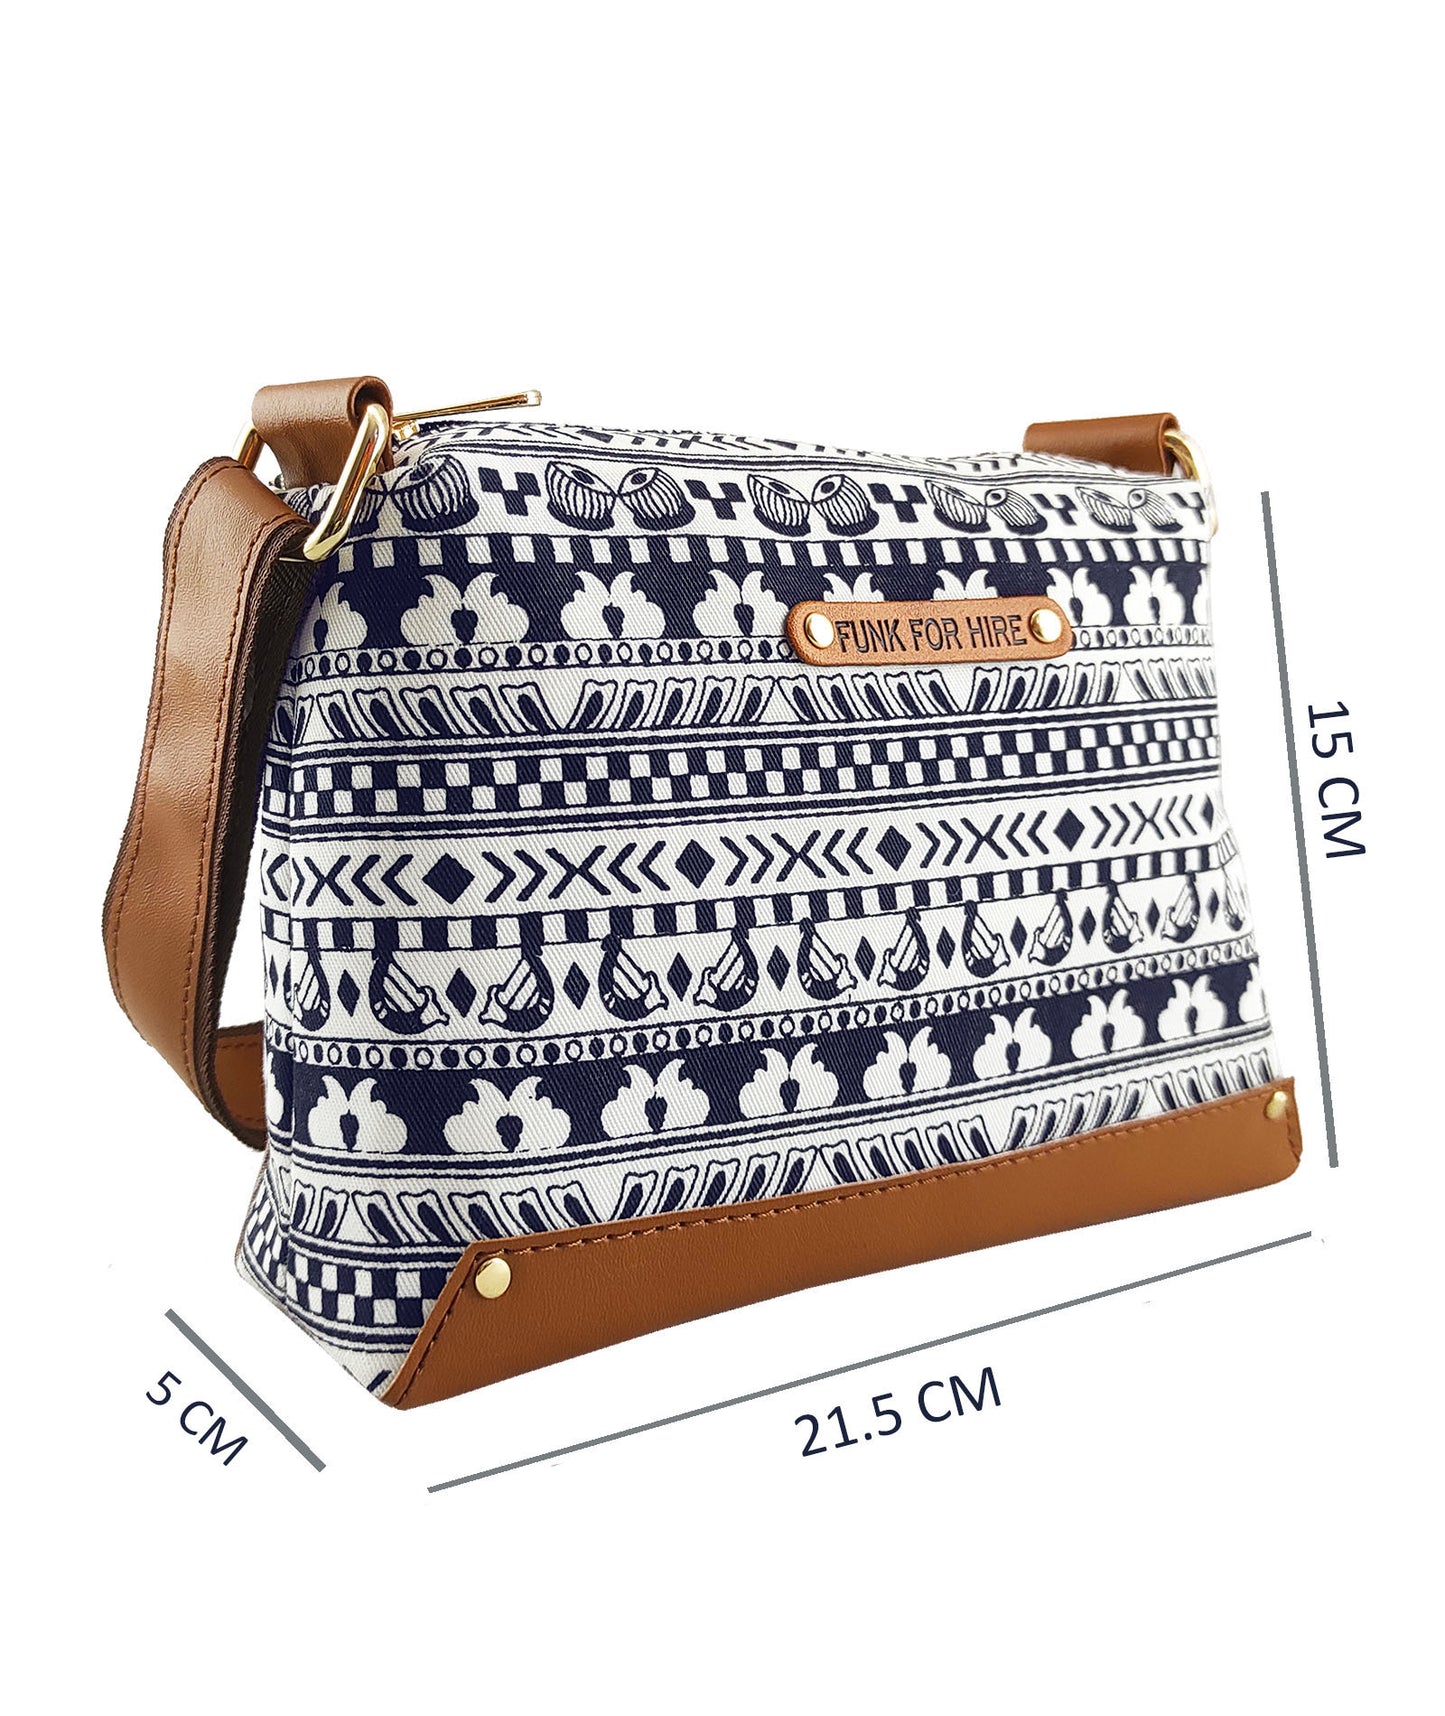 Combo Offers : Music Border Box White Sling Bag & Square Red Wallet